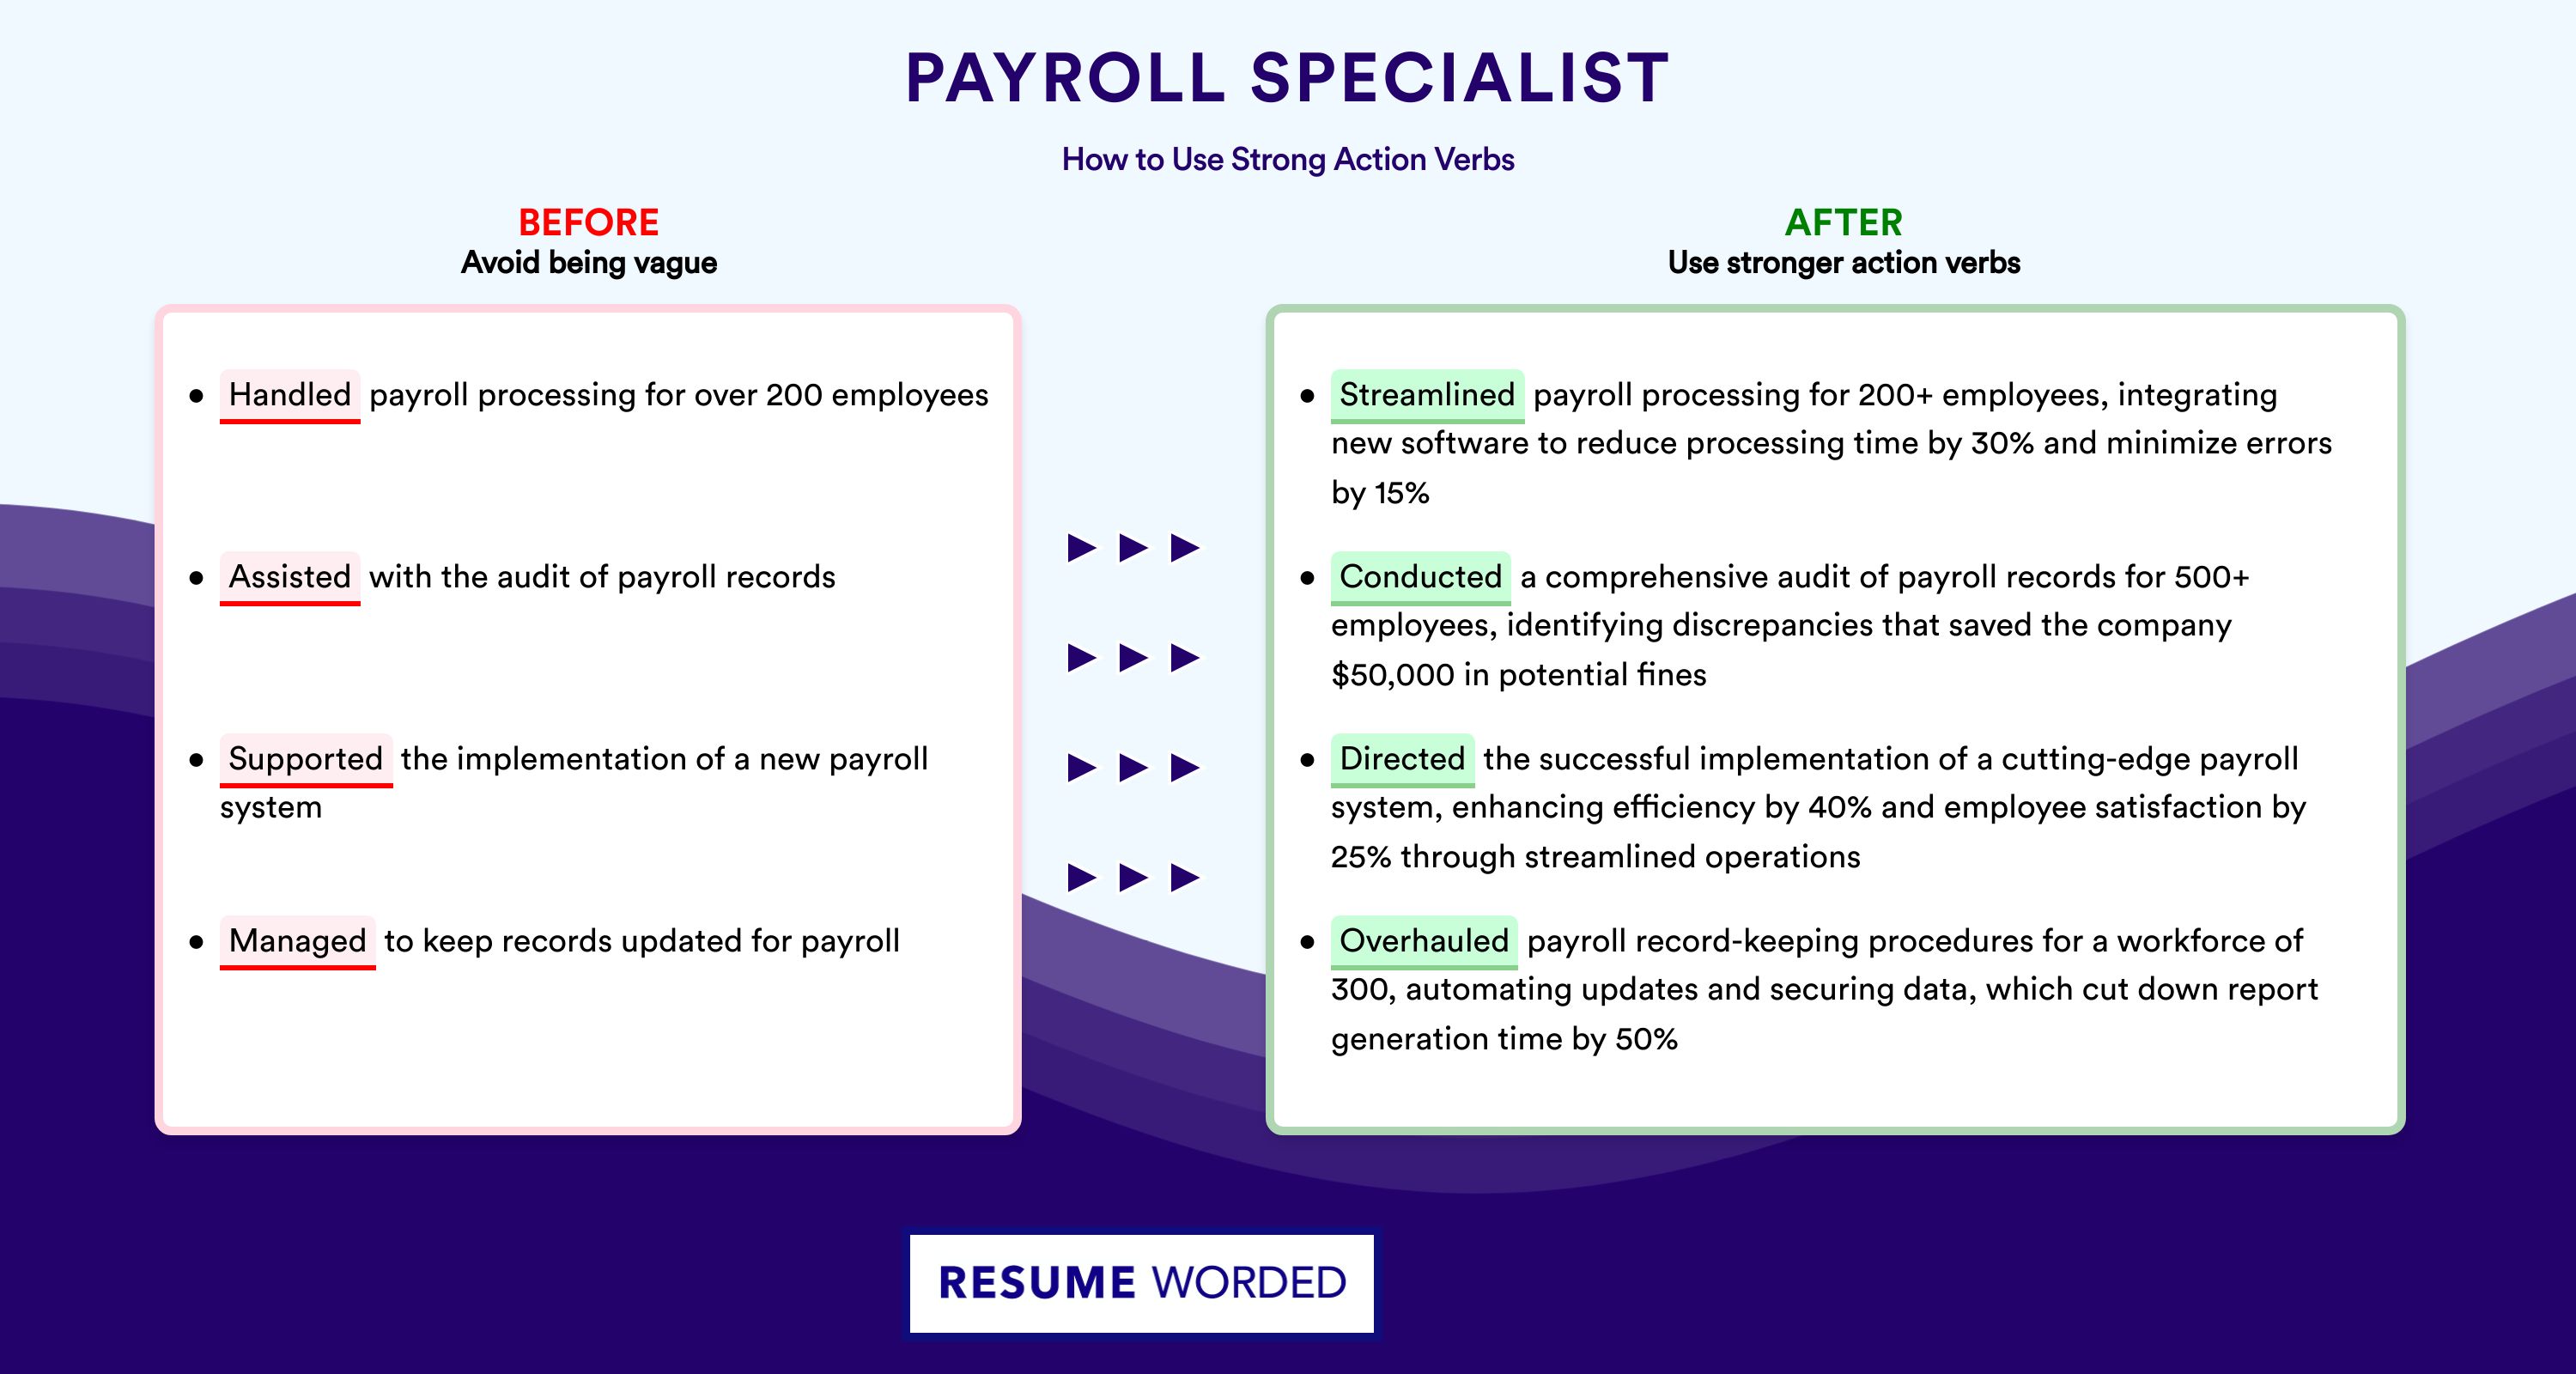 Action Verbs for Payroll Specialist